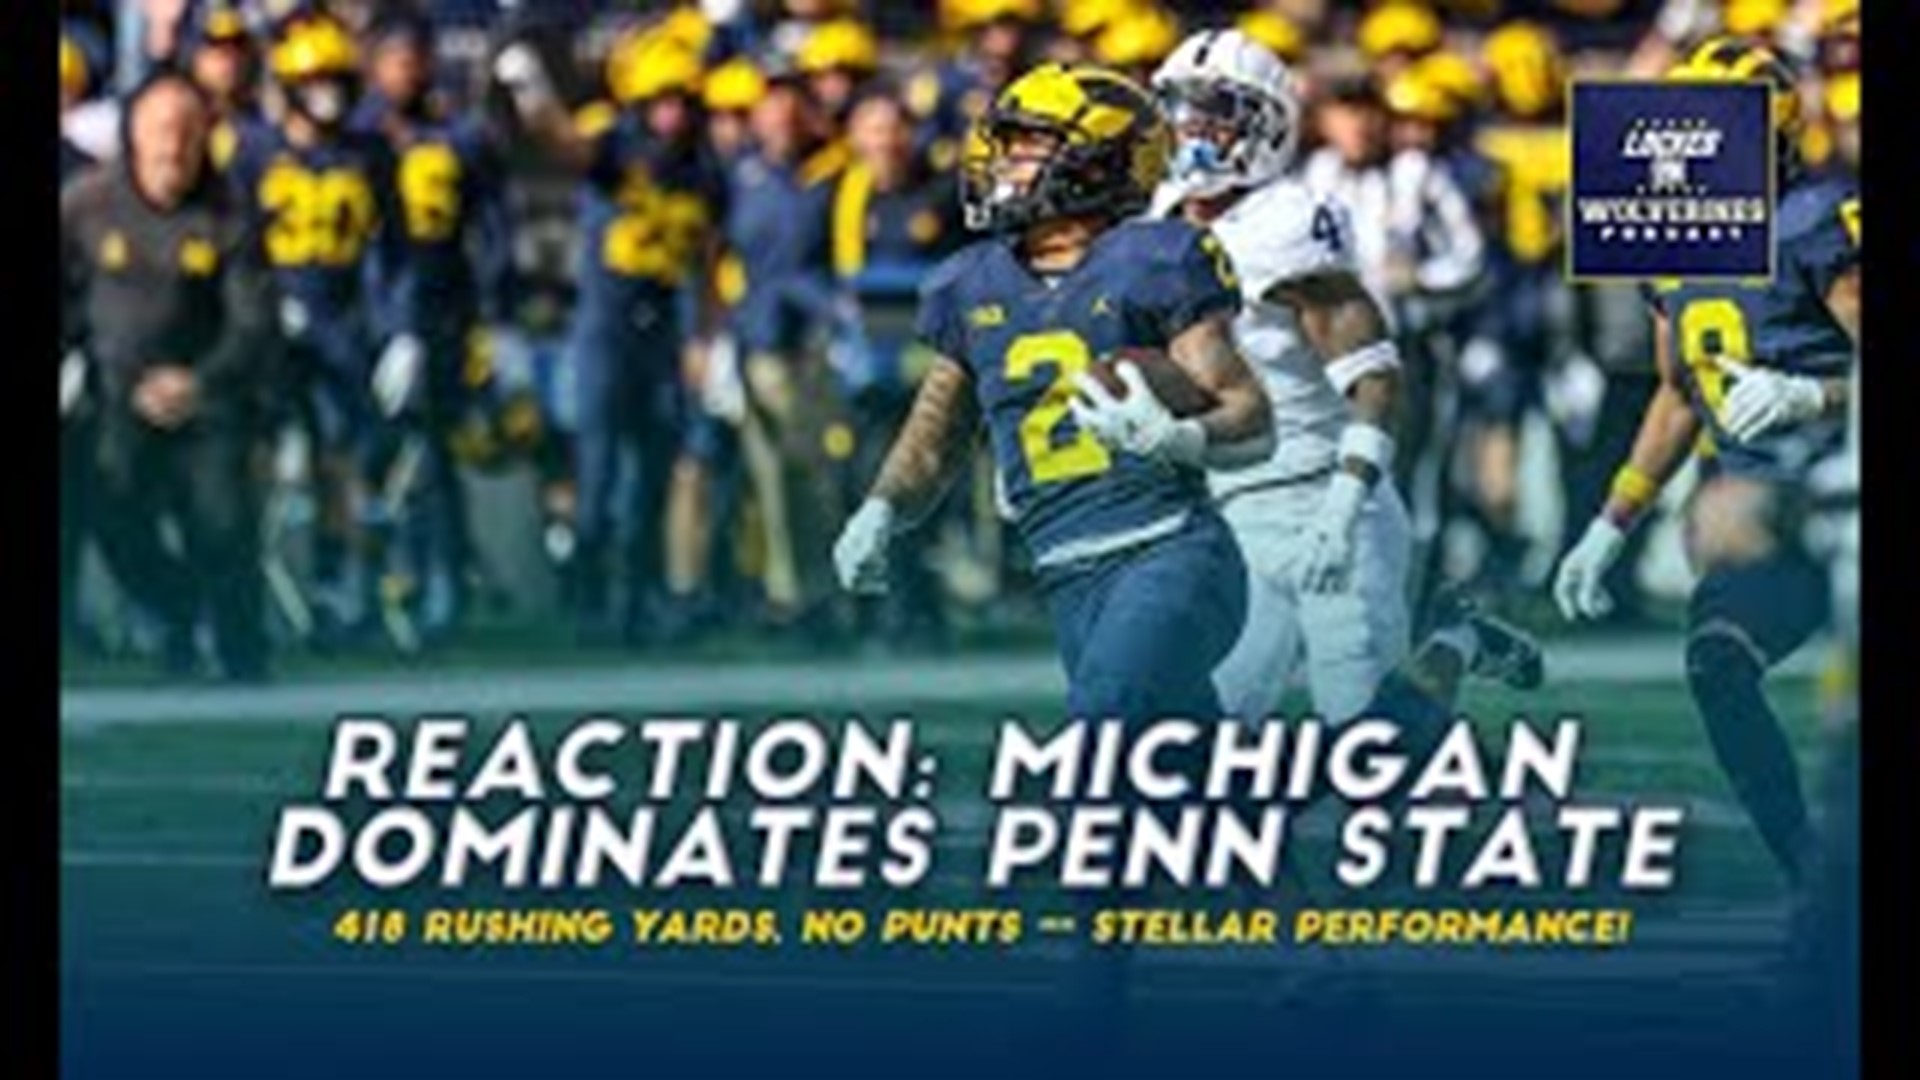 Wolverines dominated Penn State, and while there were 418 yards rushing, no punts and just sheer solid play, there were some things that need to be improved.